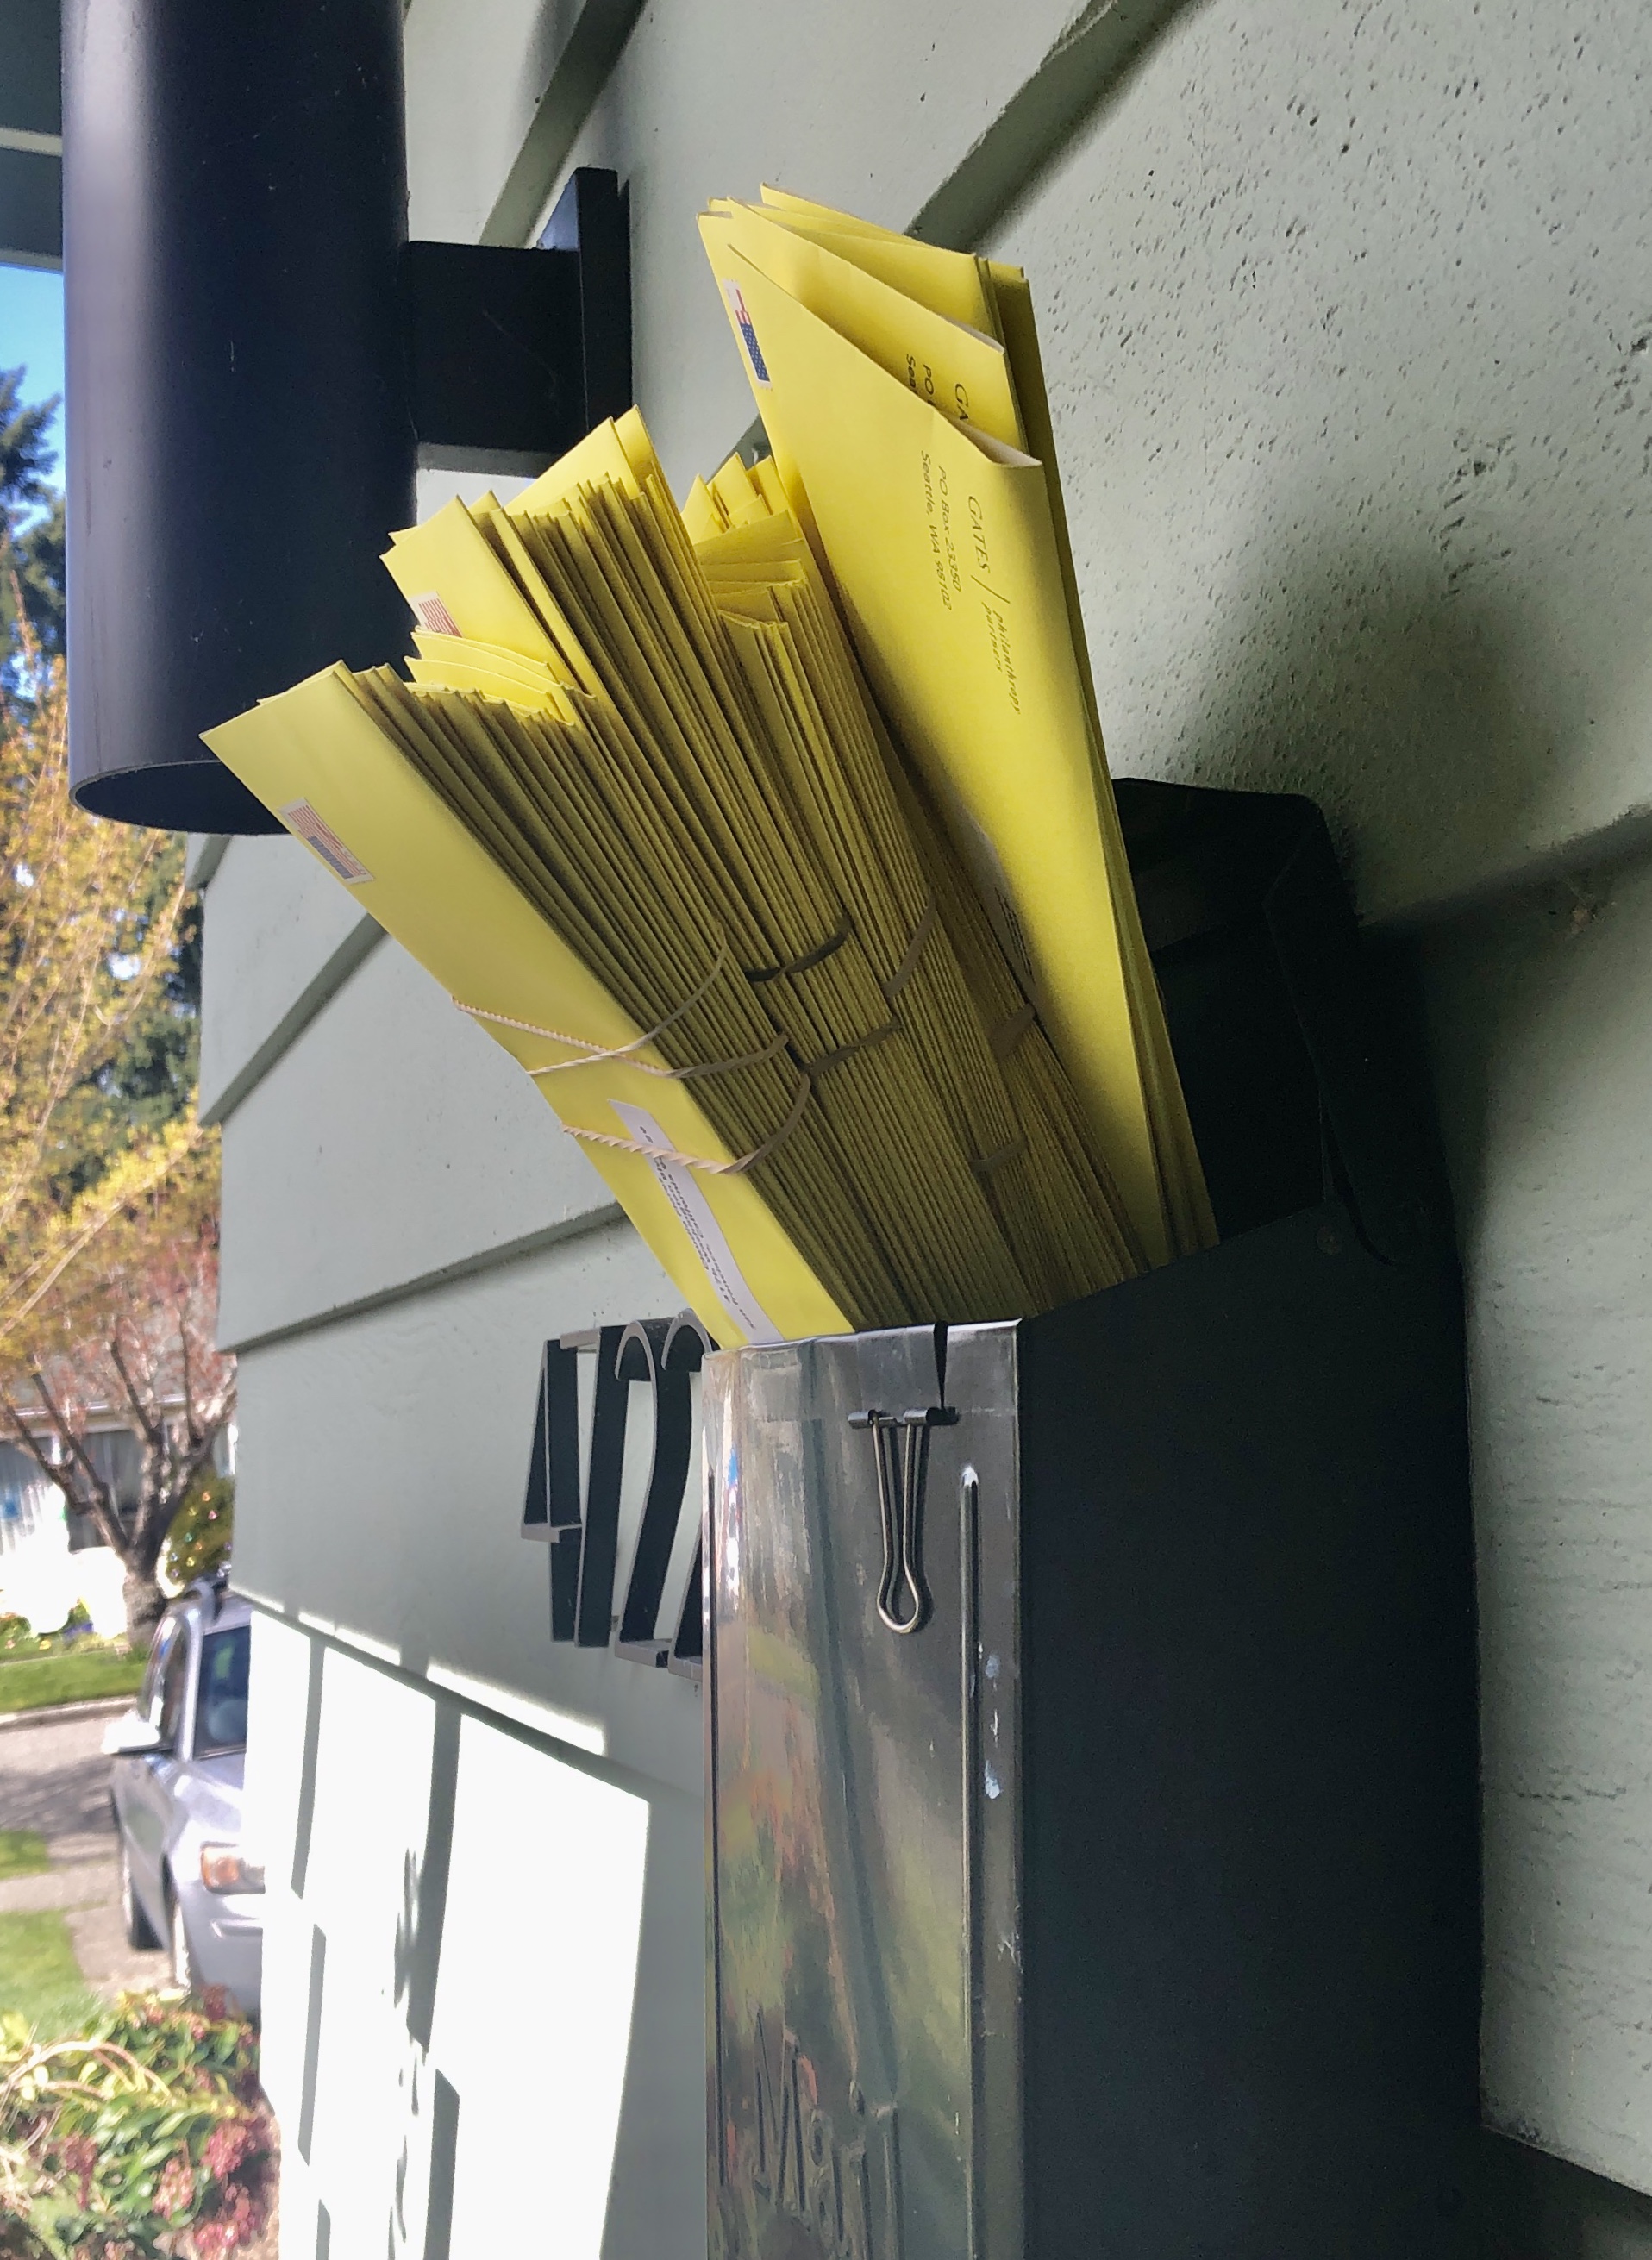 A stack of letters protruding out of a mailbox